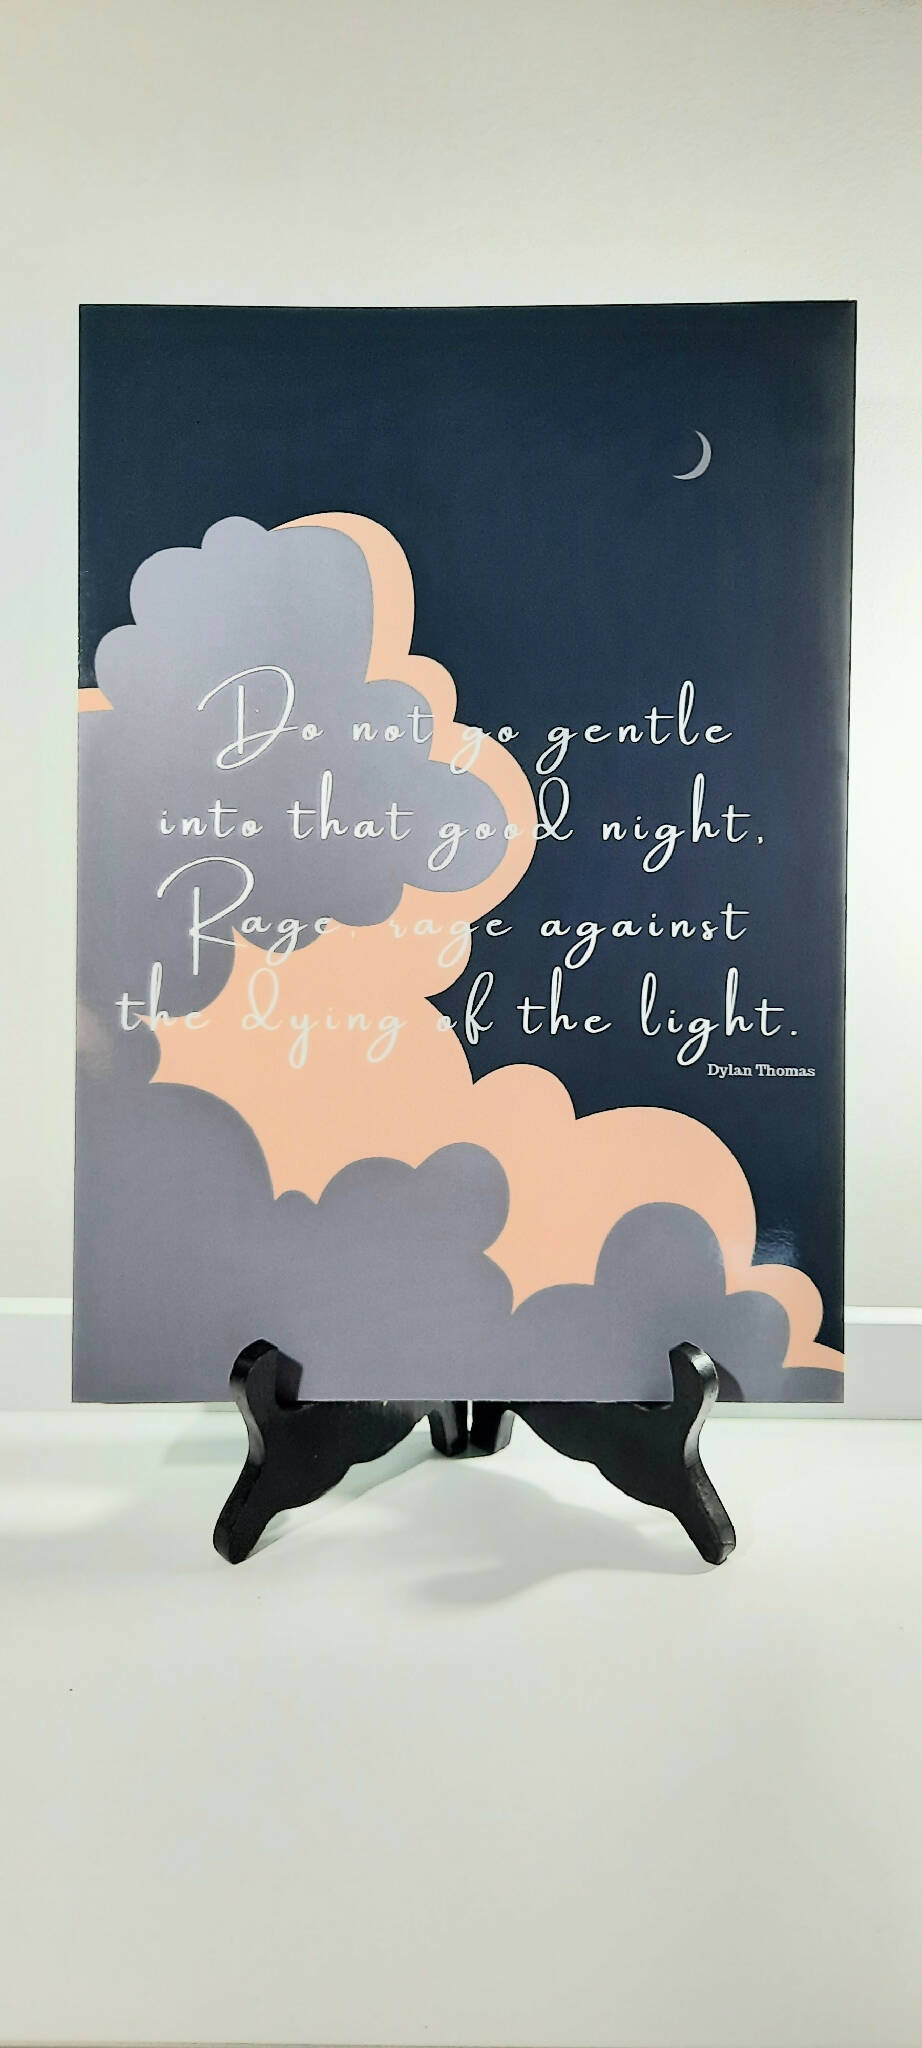 Dylan Thomas 'Do not go gentle into that good night' Welsh print, Dylan Thomas print, Welsh Wall art, Welsh poster, Welsh poetry, Digital Art